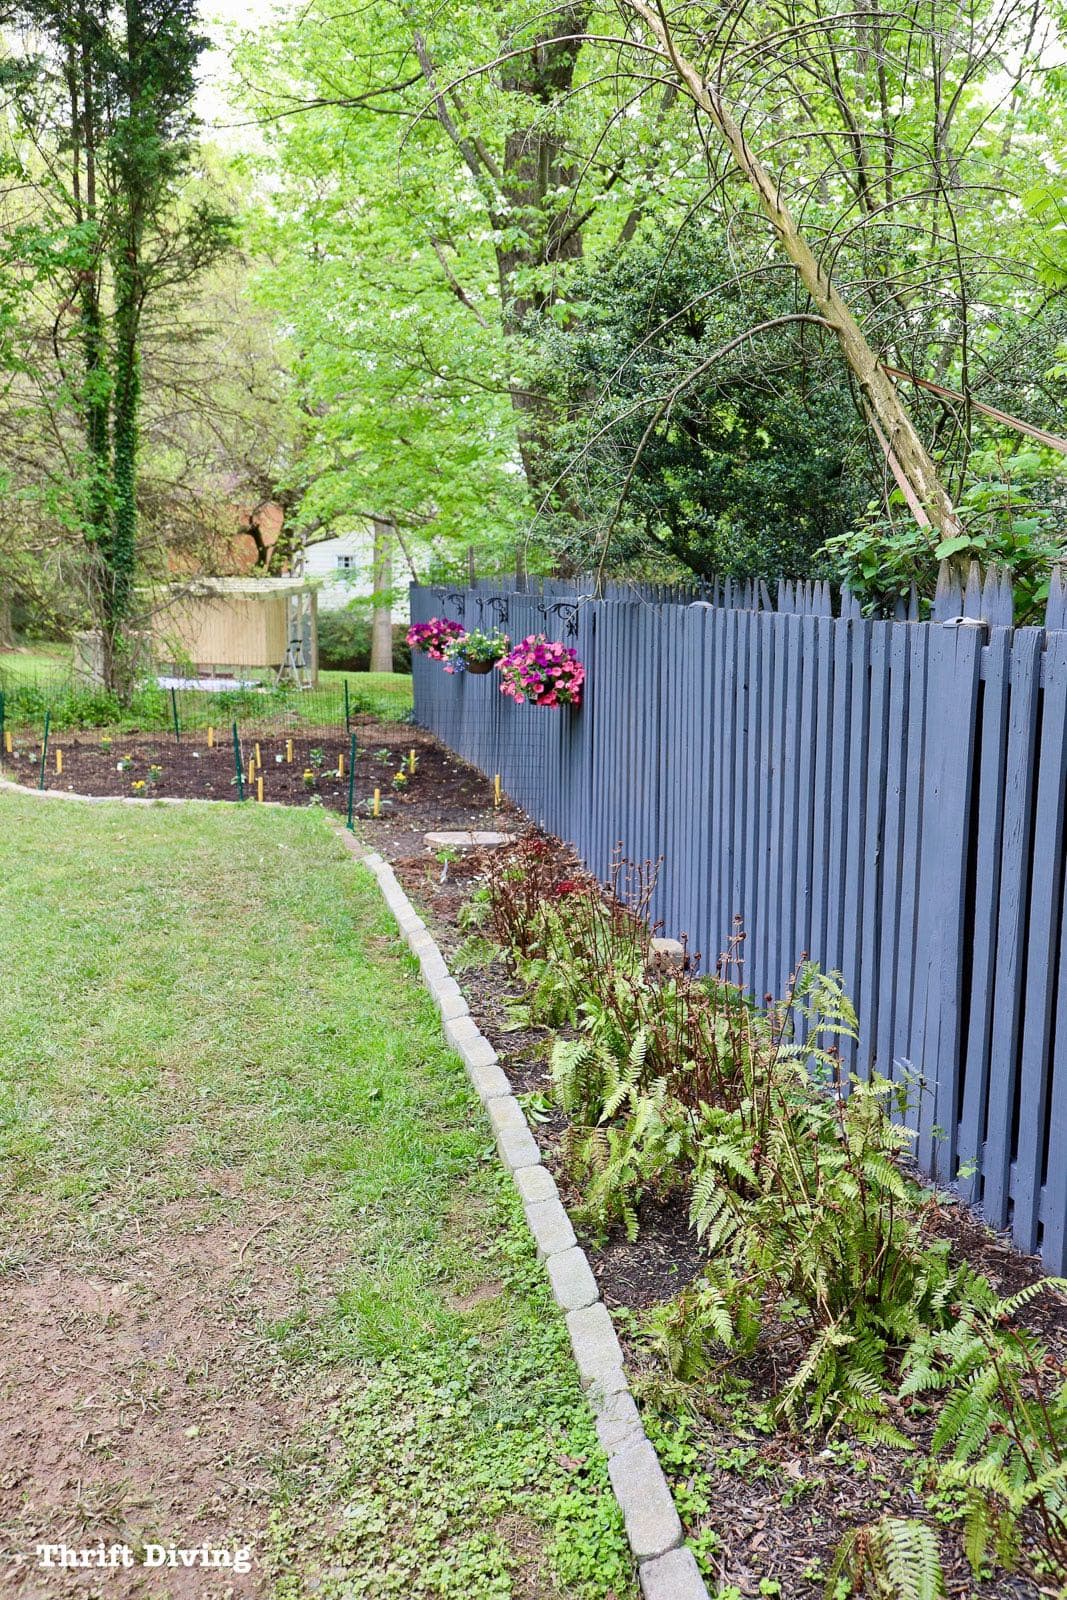 How to Use a Paint Sprayer to Paint a Wood Fence - Pretty blue fence makeover - Thrift Diving